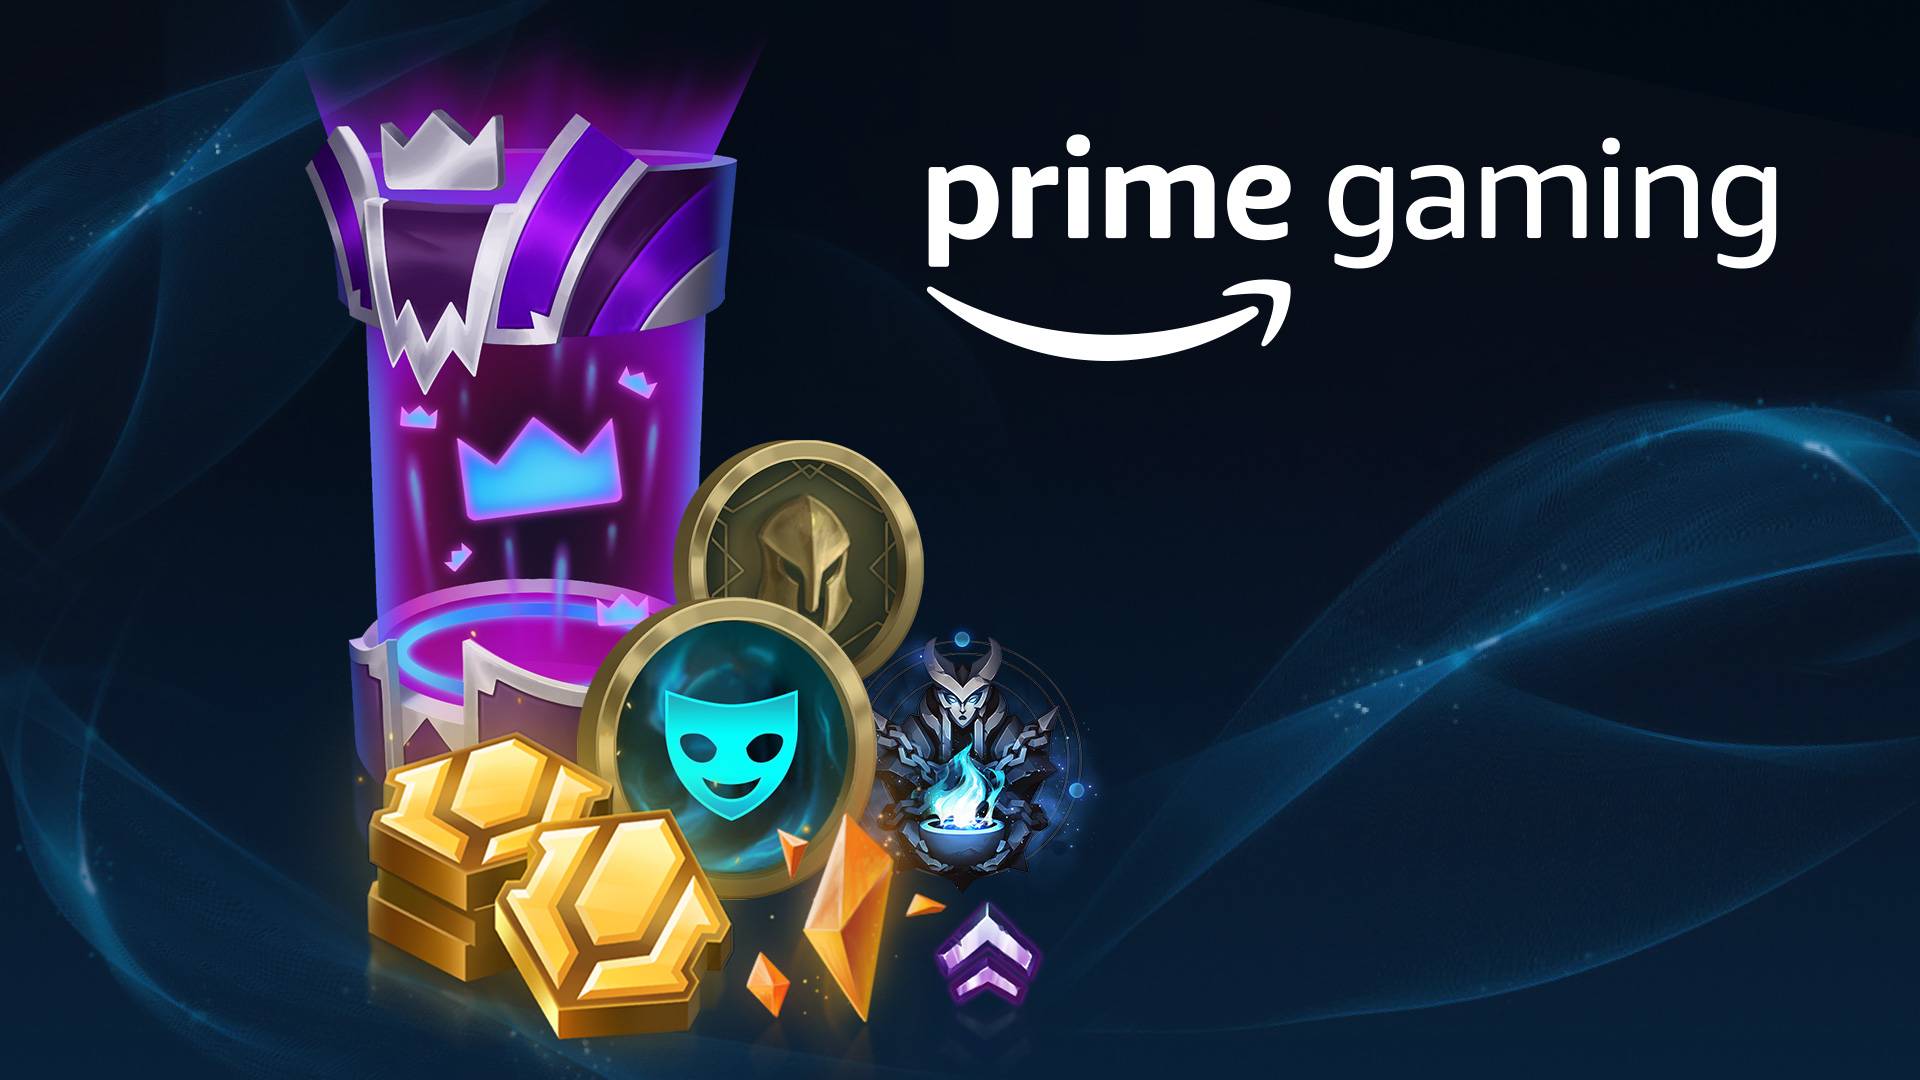 Riot Games have teamed up with Amazon Prime to offer free rewards in League of Legends.